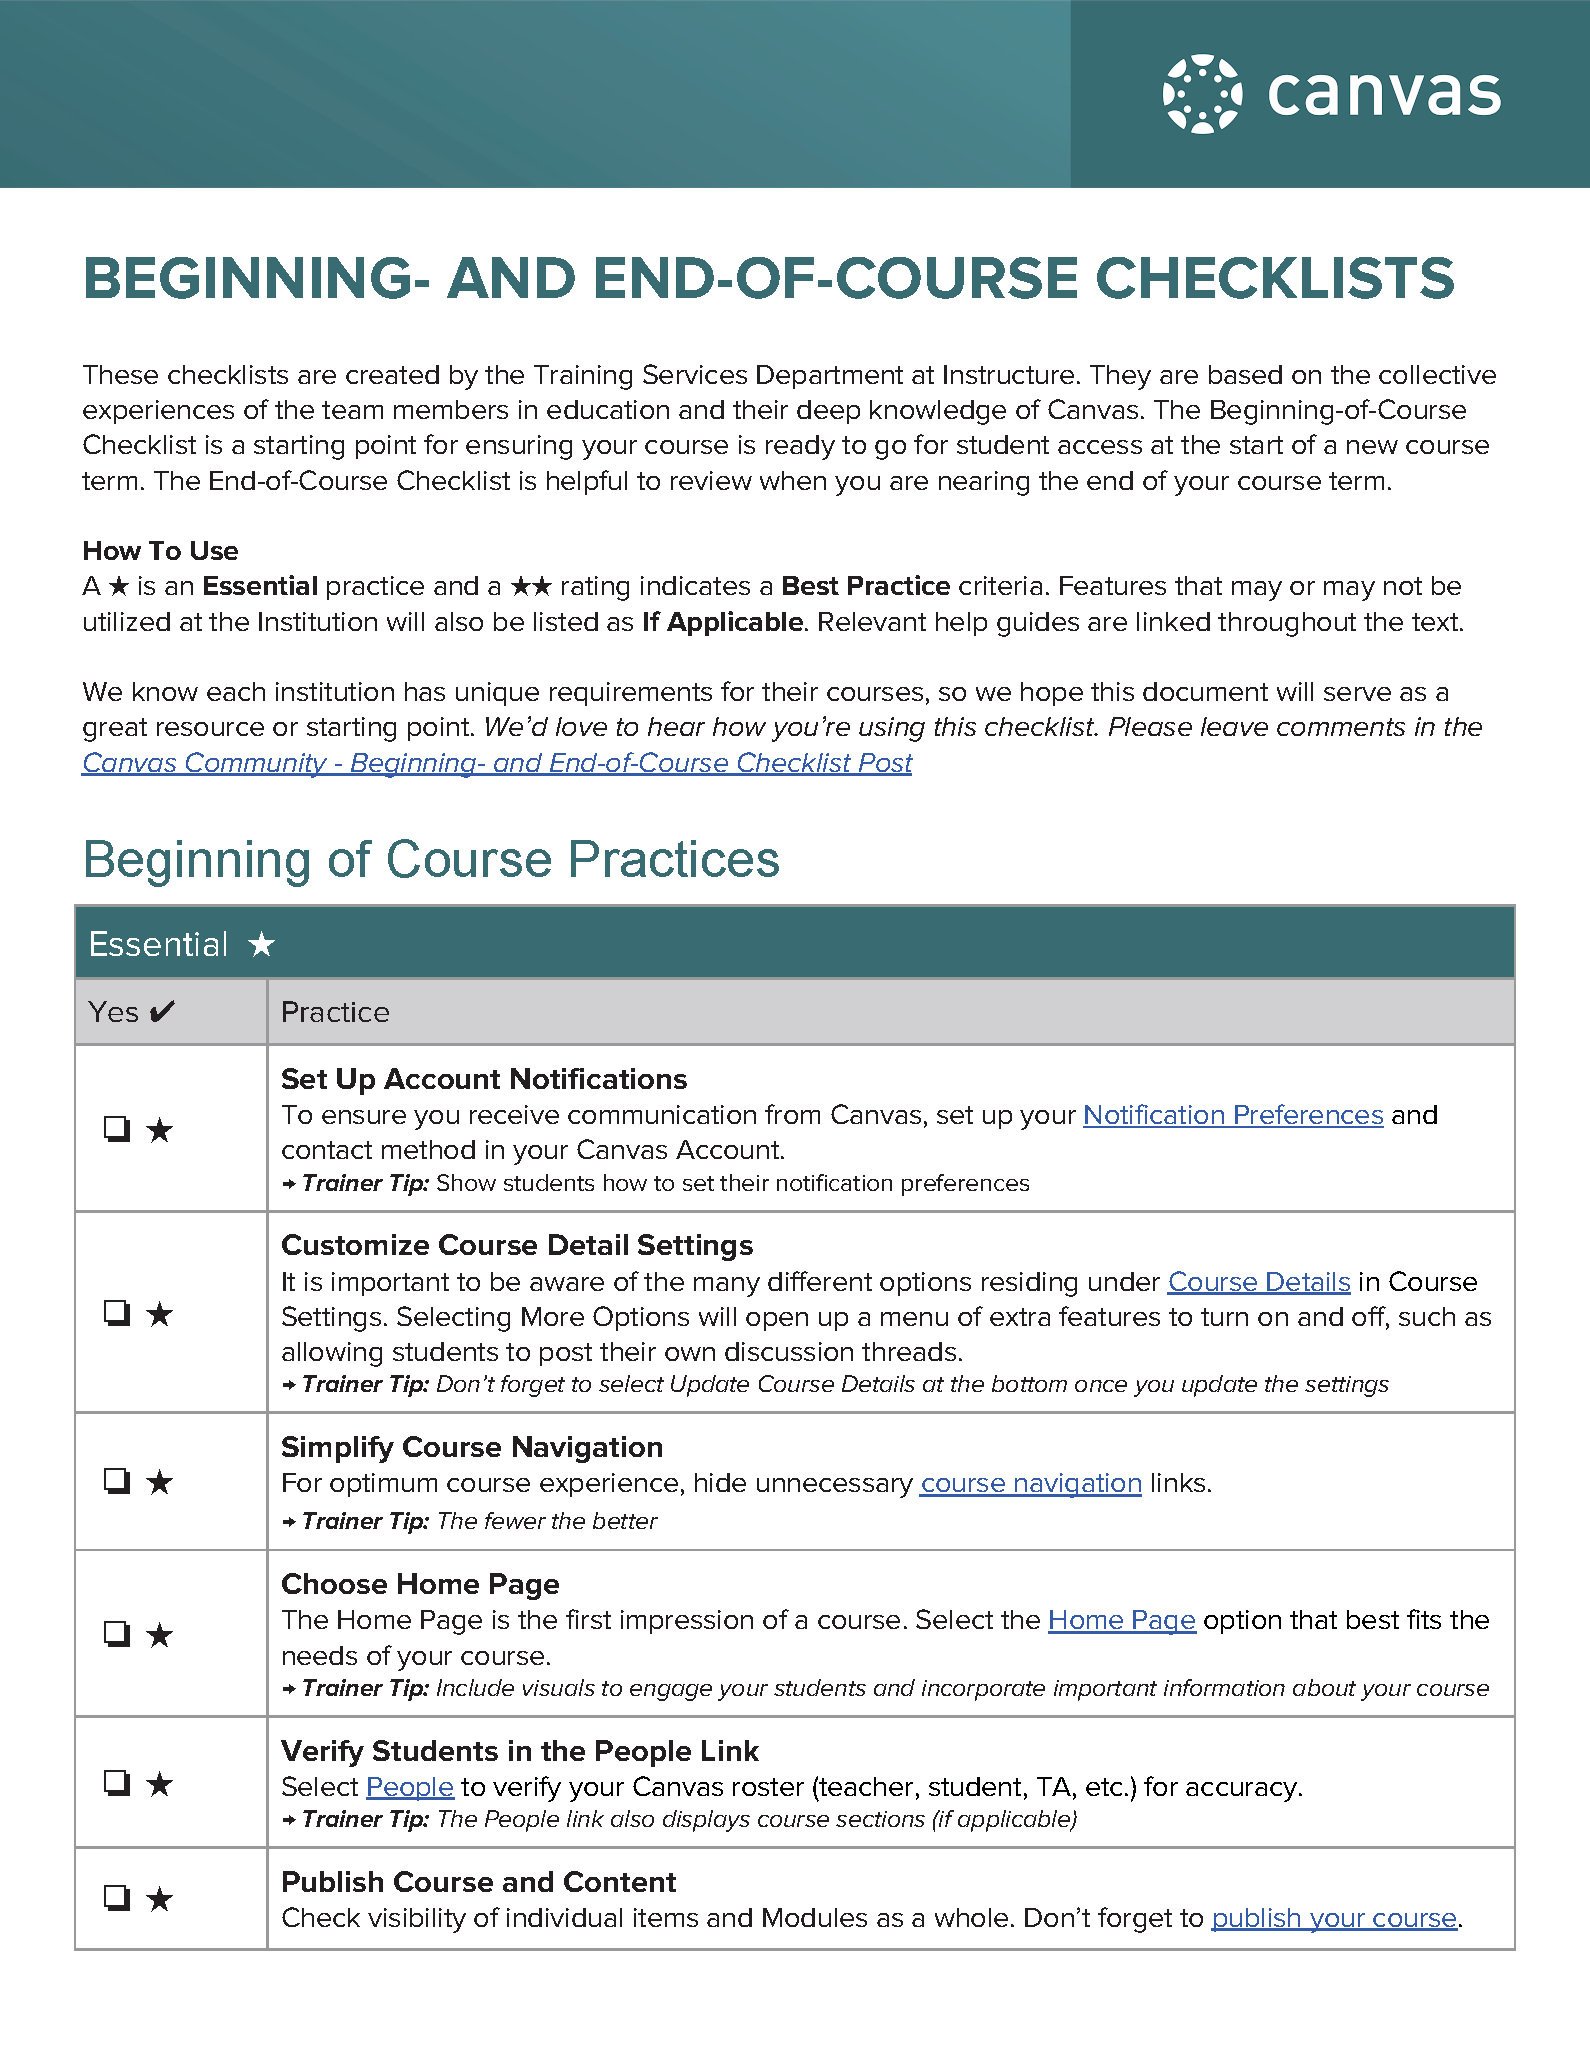 Beginning-_and_End-of-Course_Checklists_Page_1.png